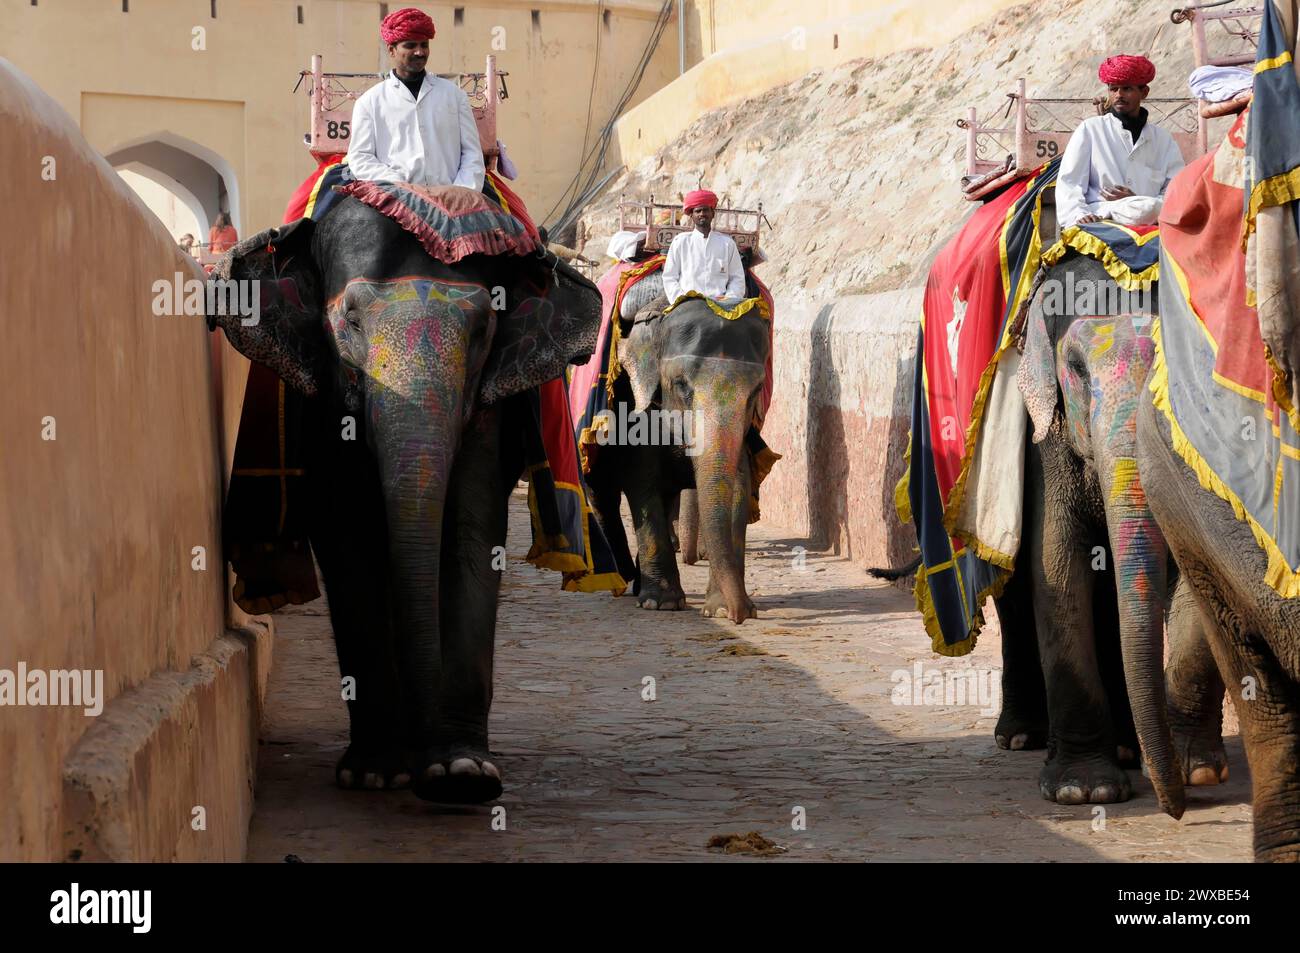 Fort of Amber or Amber Fort, Jaipur, elephant procession on the street, adorned with traditional decoration, Jaipur, Rajasthan, India Stock Photo